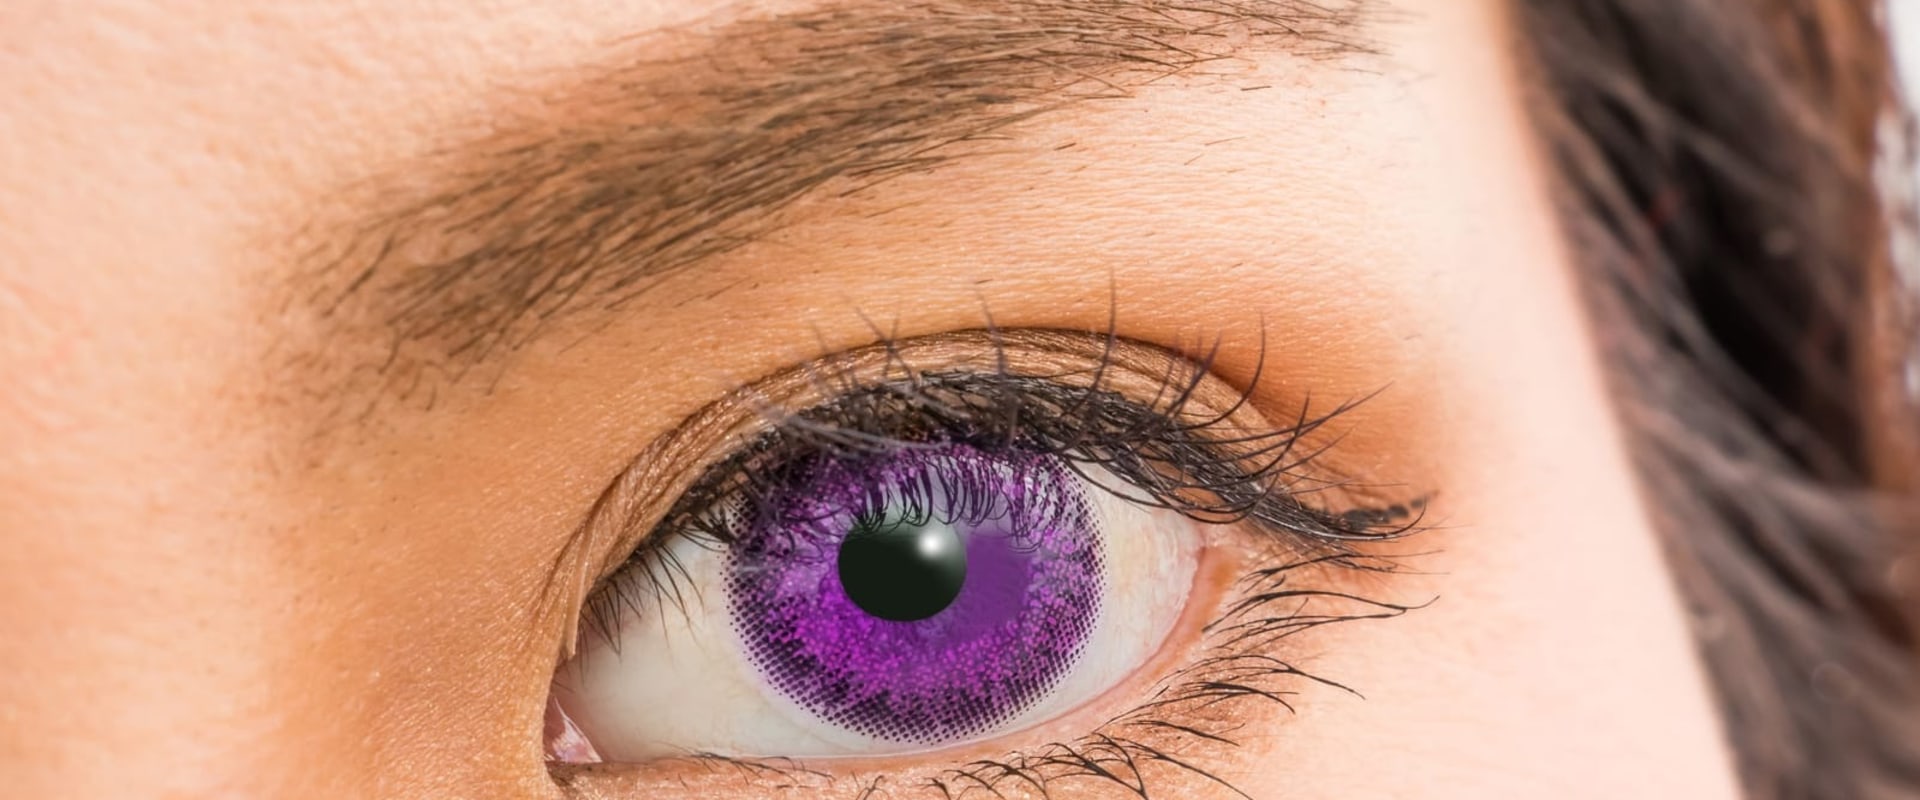 Can I Get Colored Contacts from an Optometrist? - The Definitive Guide